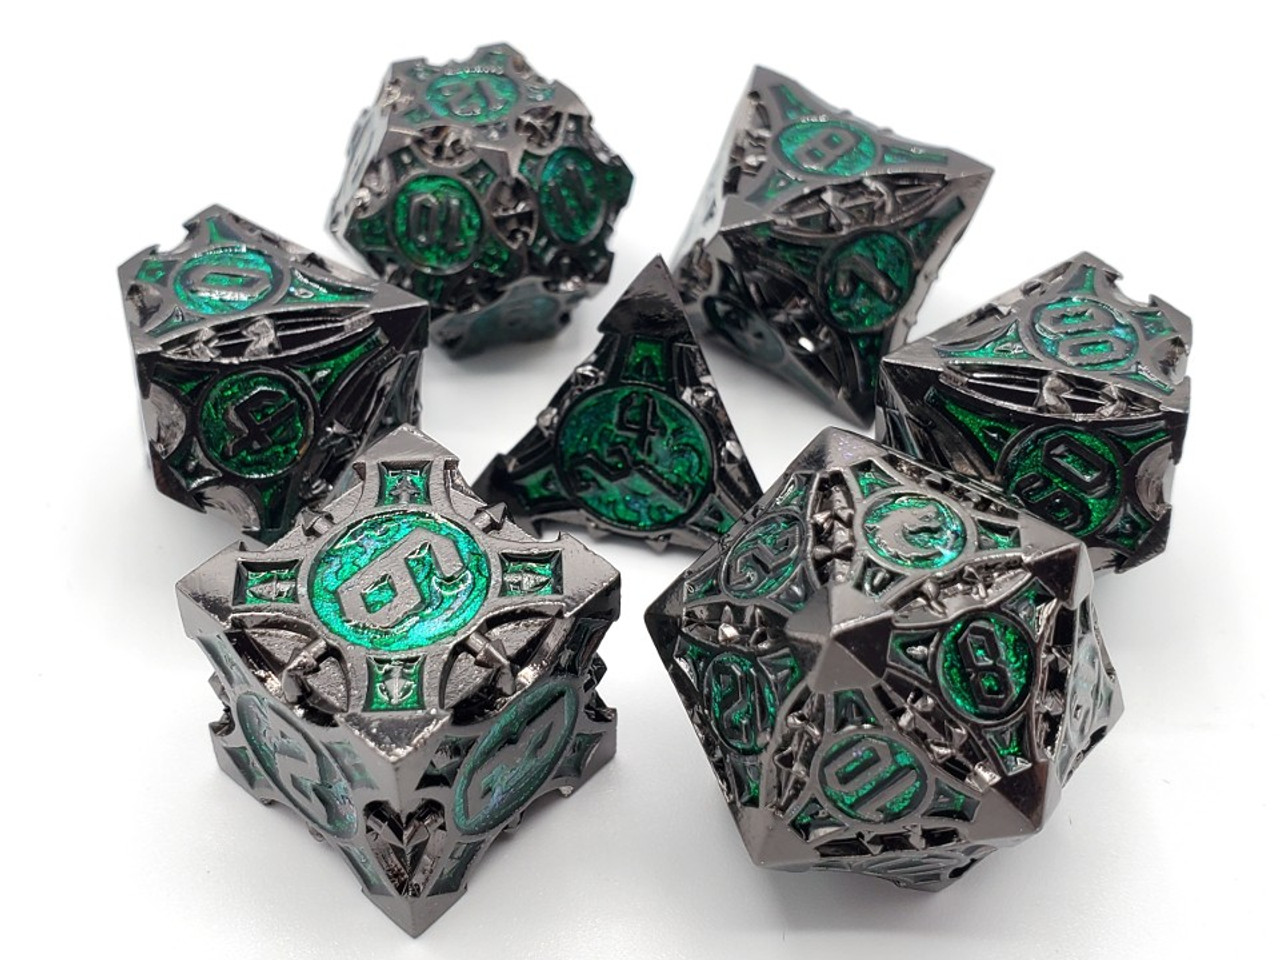 Old School 7 Piece Dnd RPG Metal Dice Set Gnome Forged - Black Nickel W/ Green